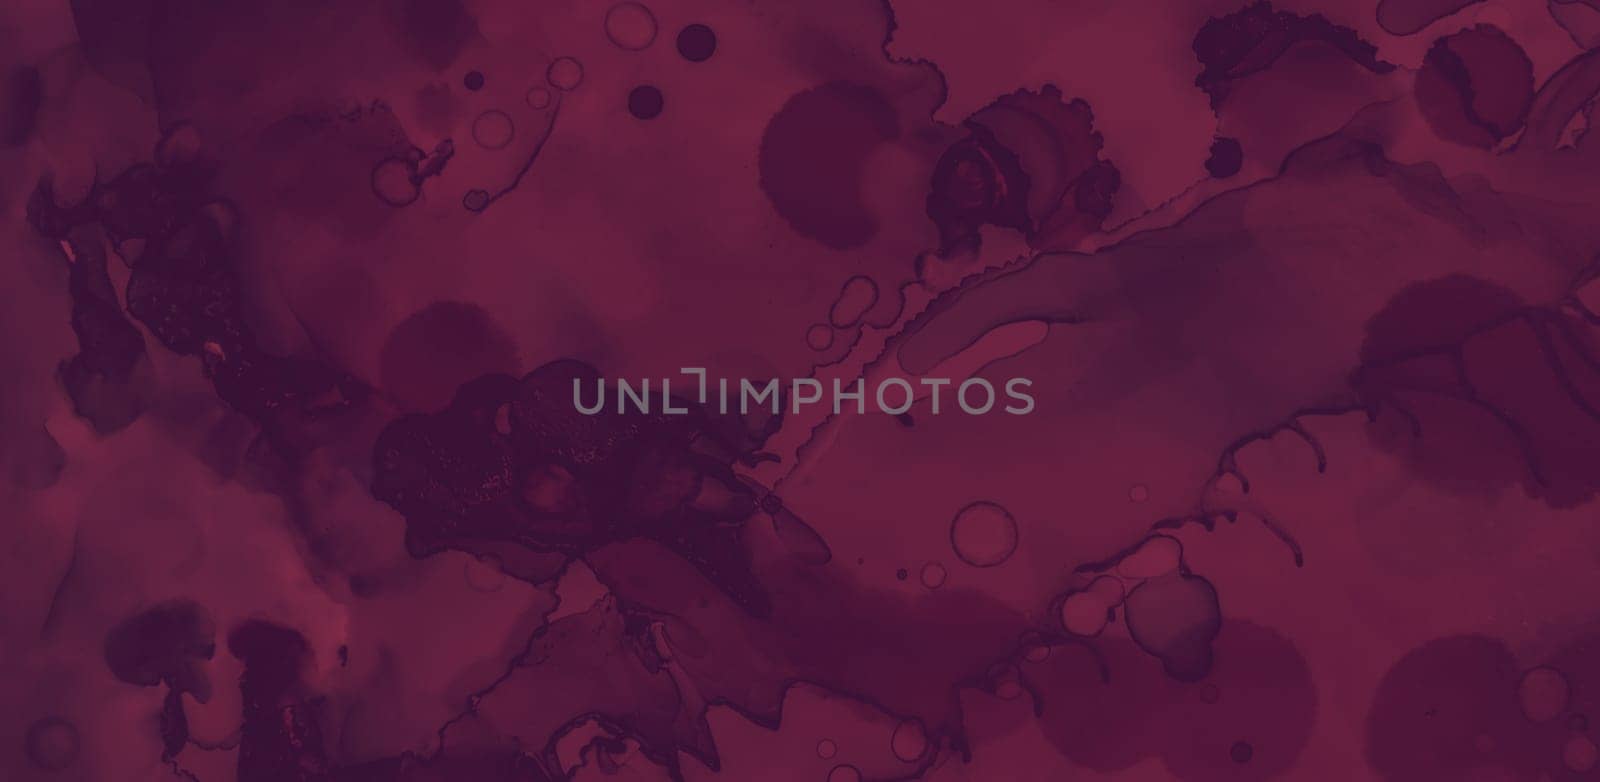 Red Wine Splash. Watercolour Template. Abstract Alcohol Banner. Dark Maroon Texture. Color Wine Stains. Watercolour Winery Pattern. Dark Winery Template. Red Wine Stains.